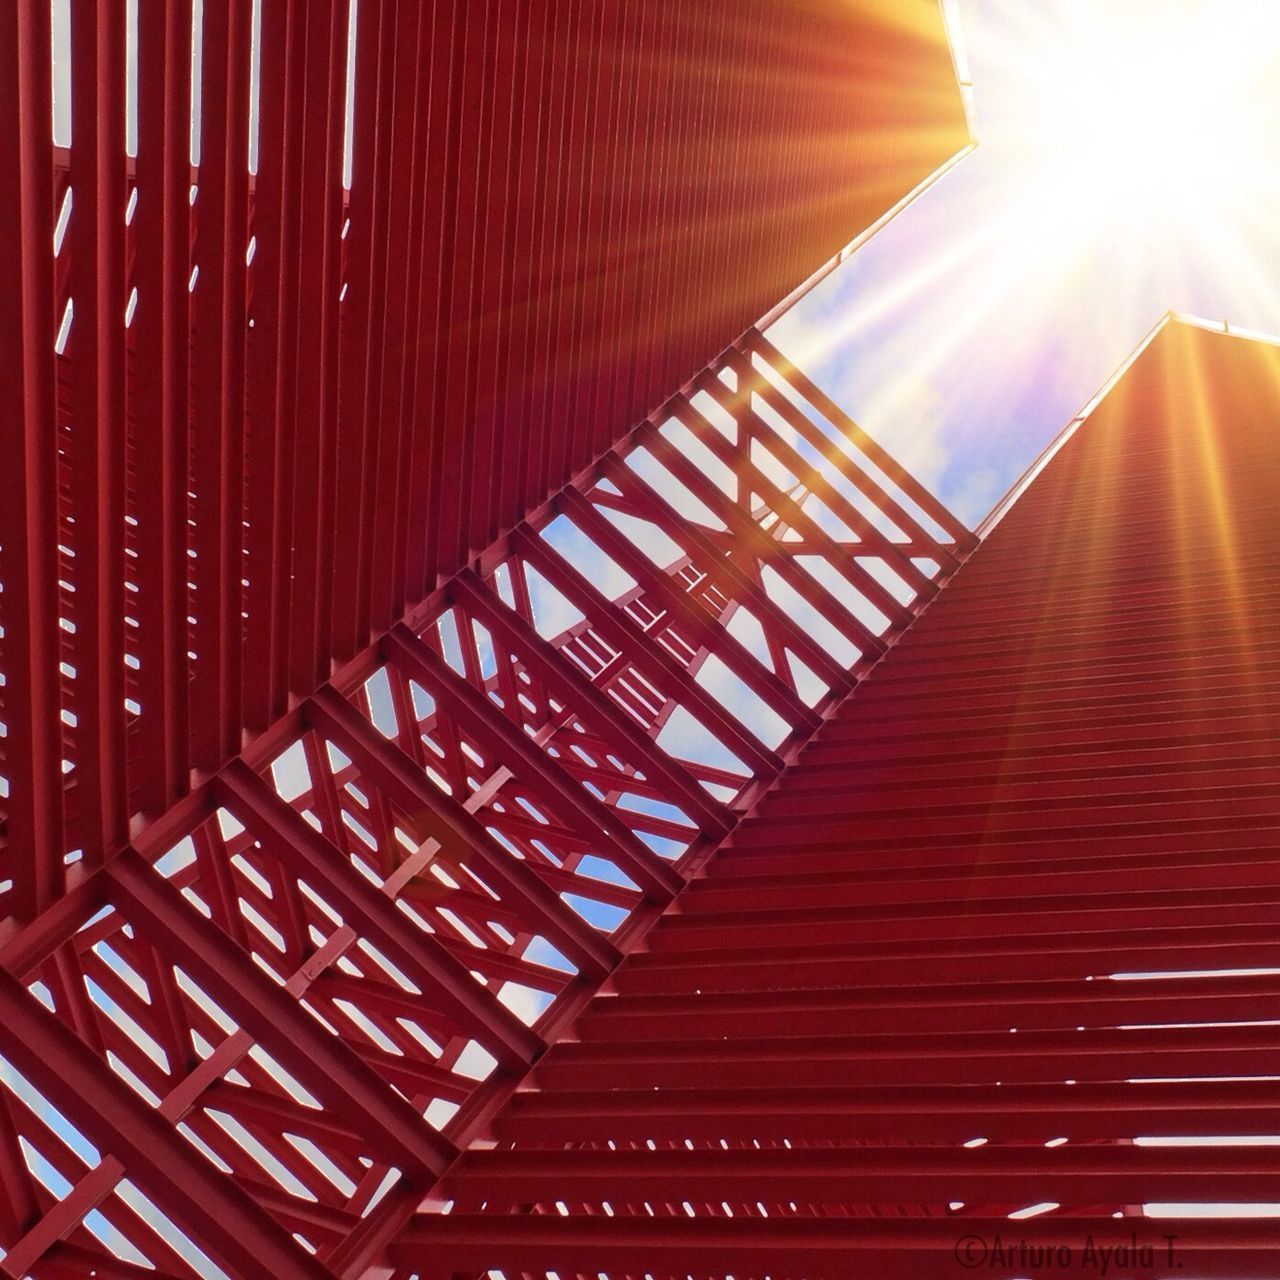 sun, sunbeam, sunlight, lens flare, low angle view, built structure, architecture, sunny, pattern, building exterior, bright, red, no people, sky, day, outdoors, sunset, steps, orange color, shadow